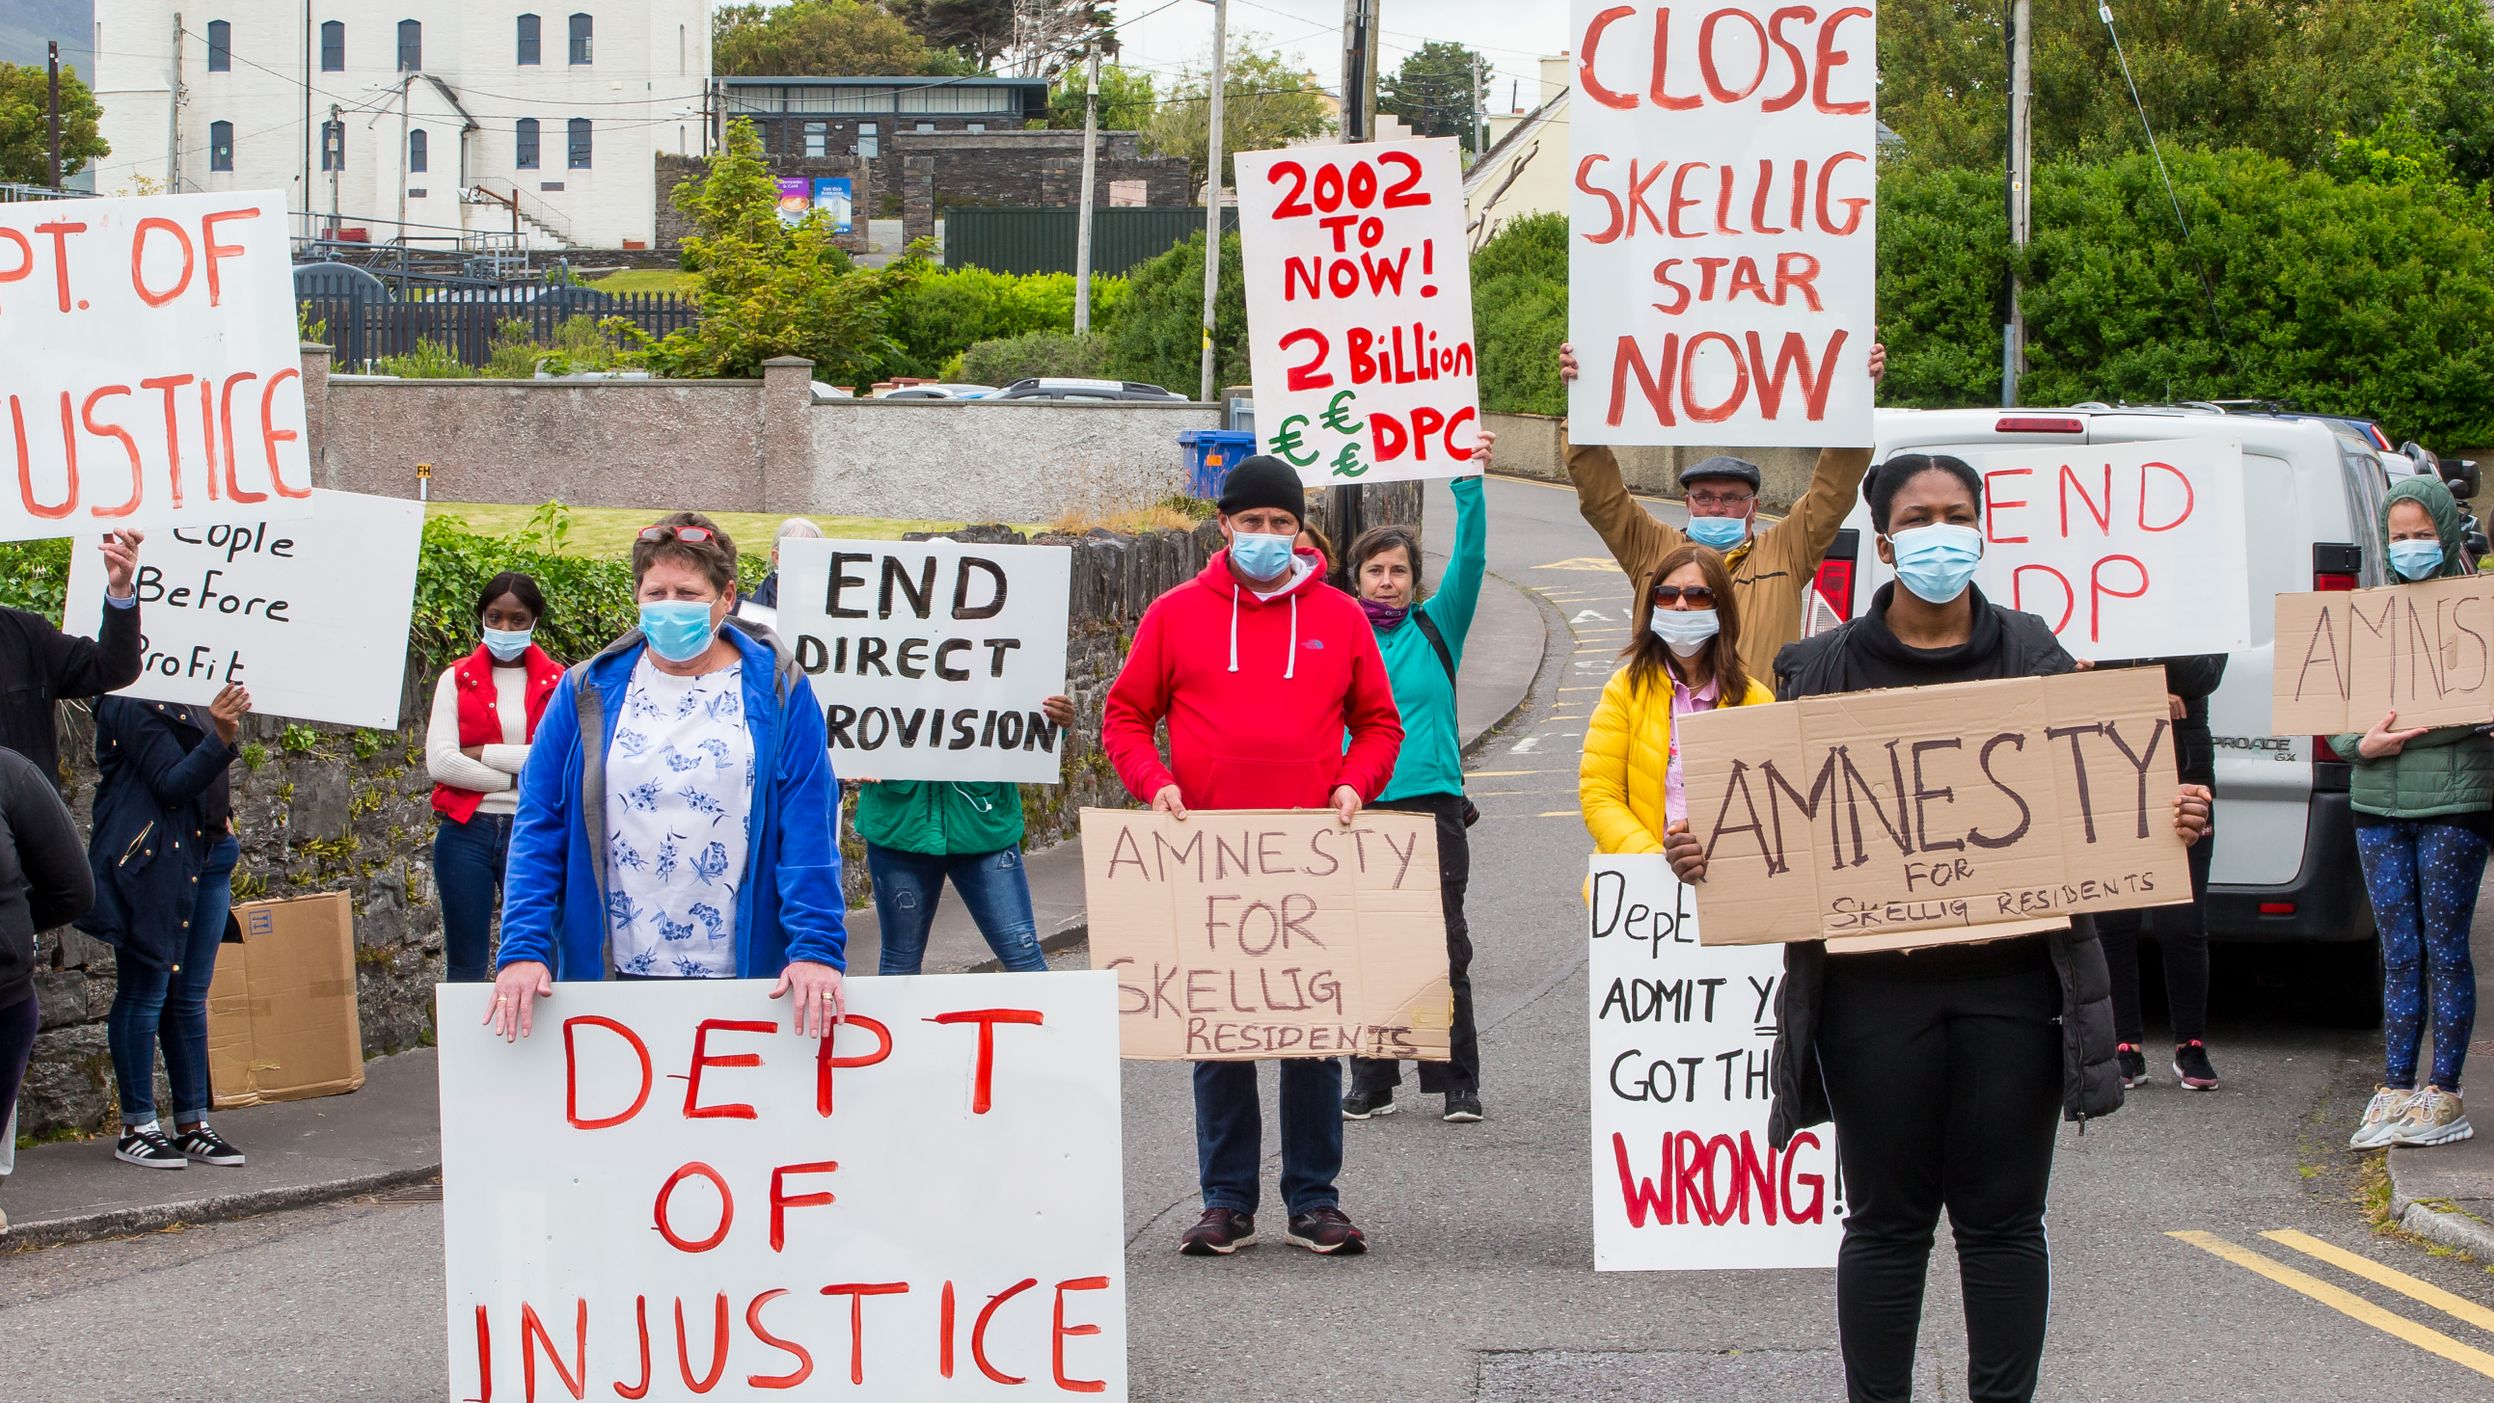 Cahersiveen locals and residents of the Skellig Star accomodation center call for the resignation of Justice Minister Charlie Flanagan on Tuesday, June 9, in Cahersiveen, Ireland. (Photo: Alan Landers)